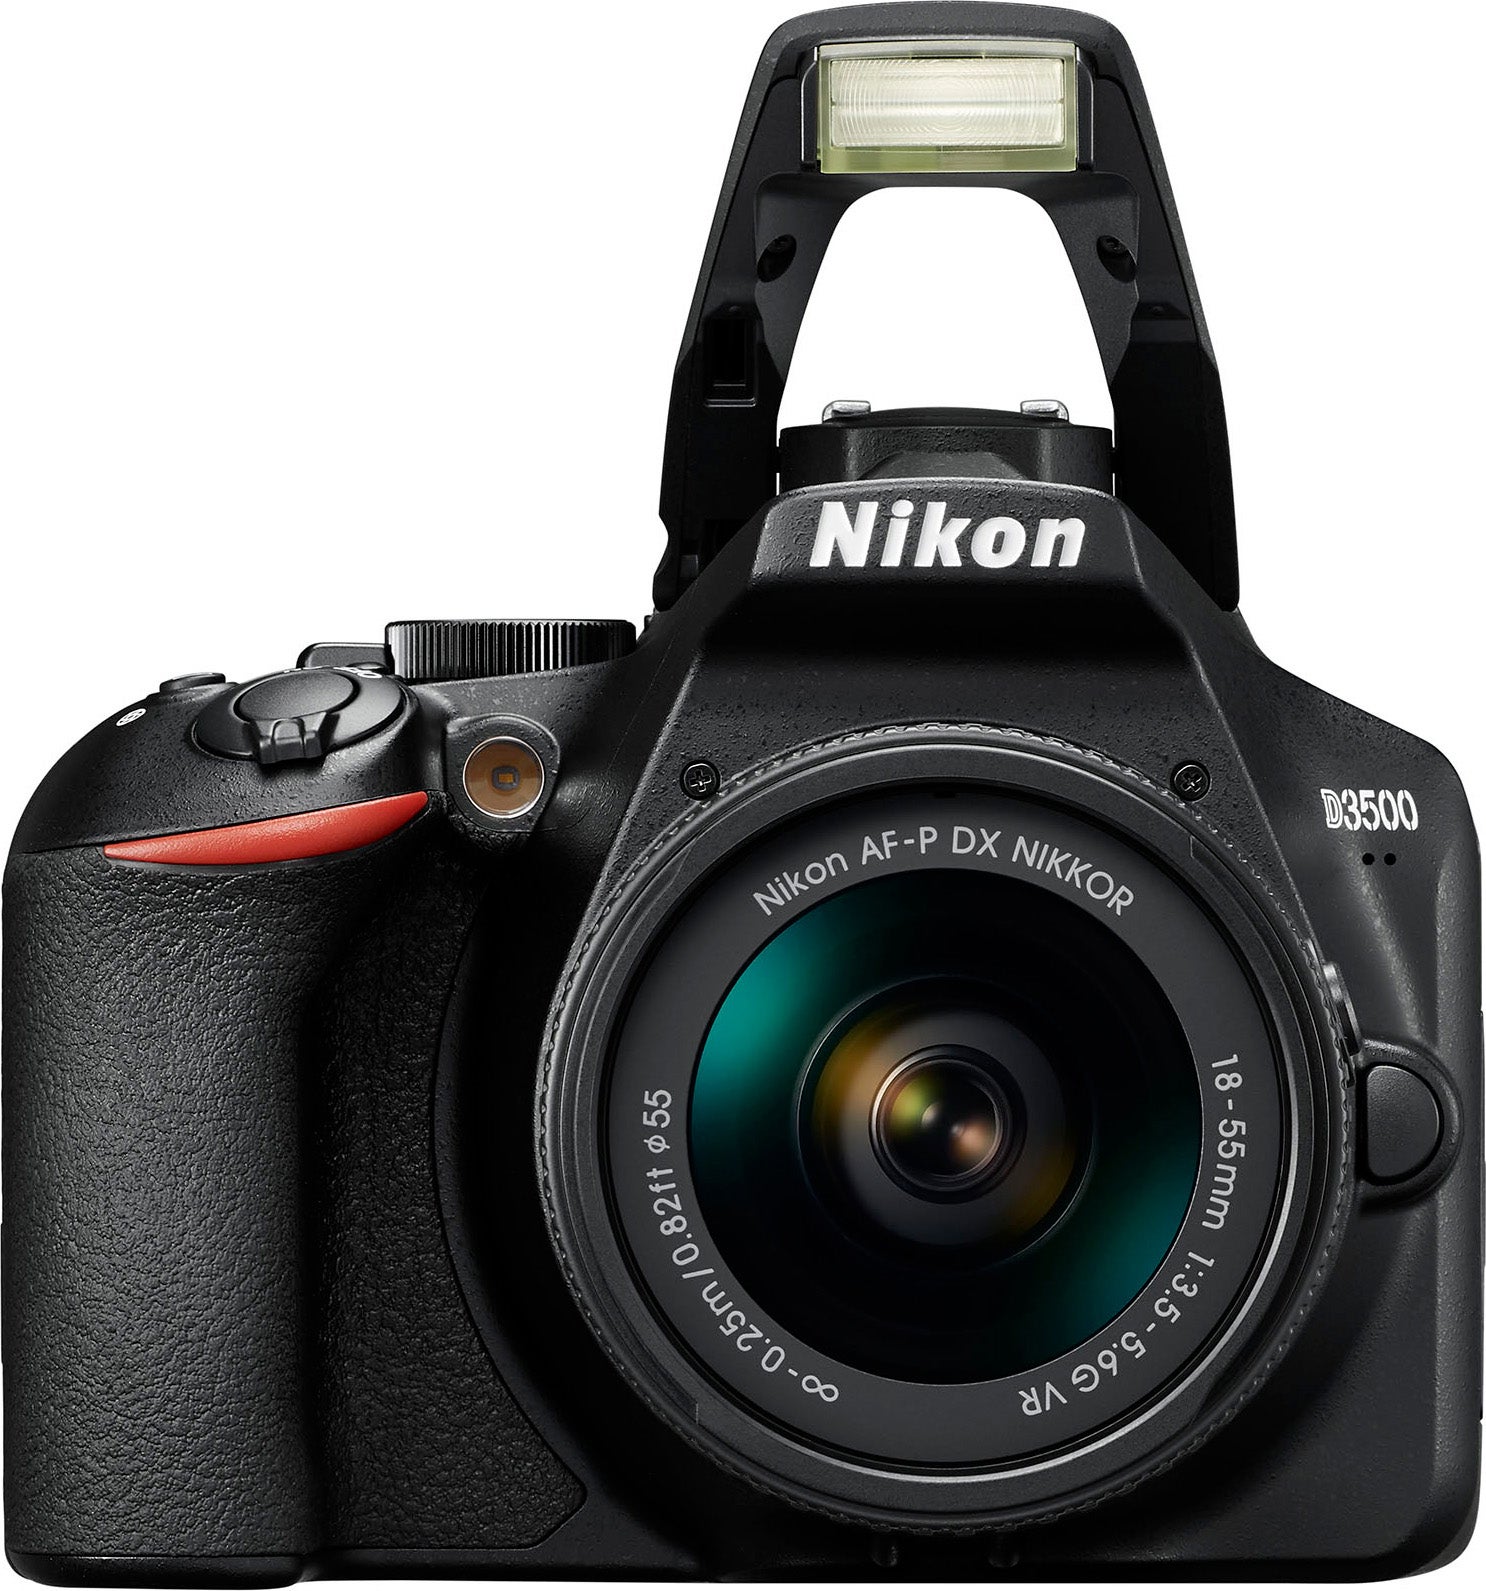 The Nikon D3500 with pop-up flash